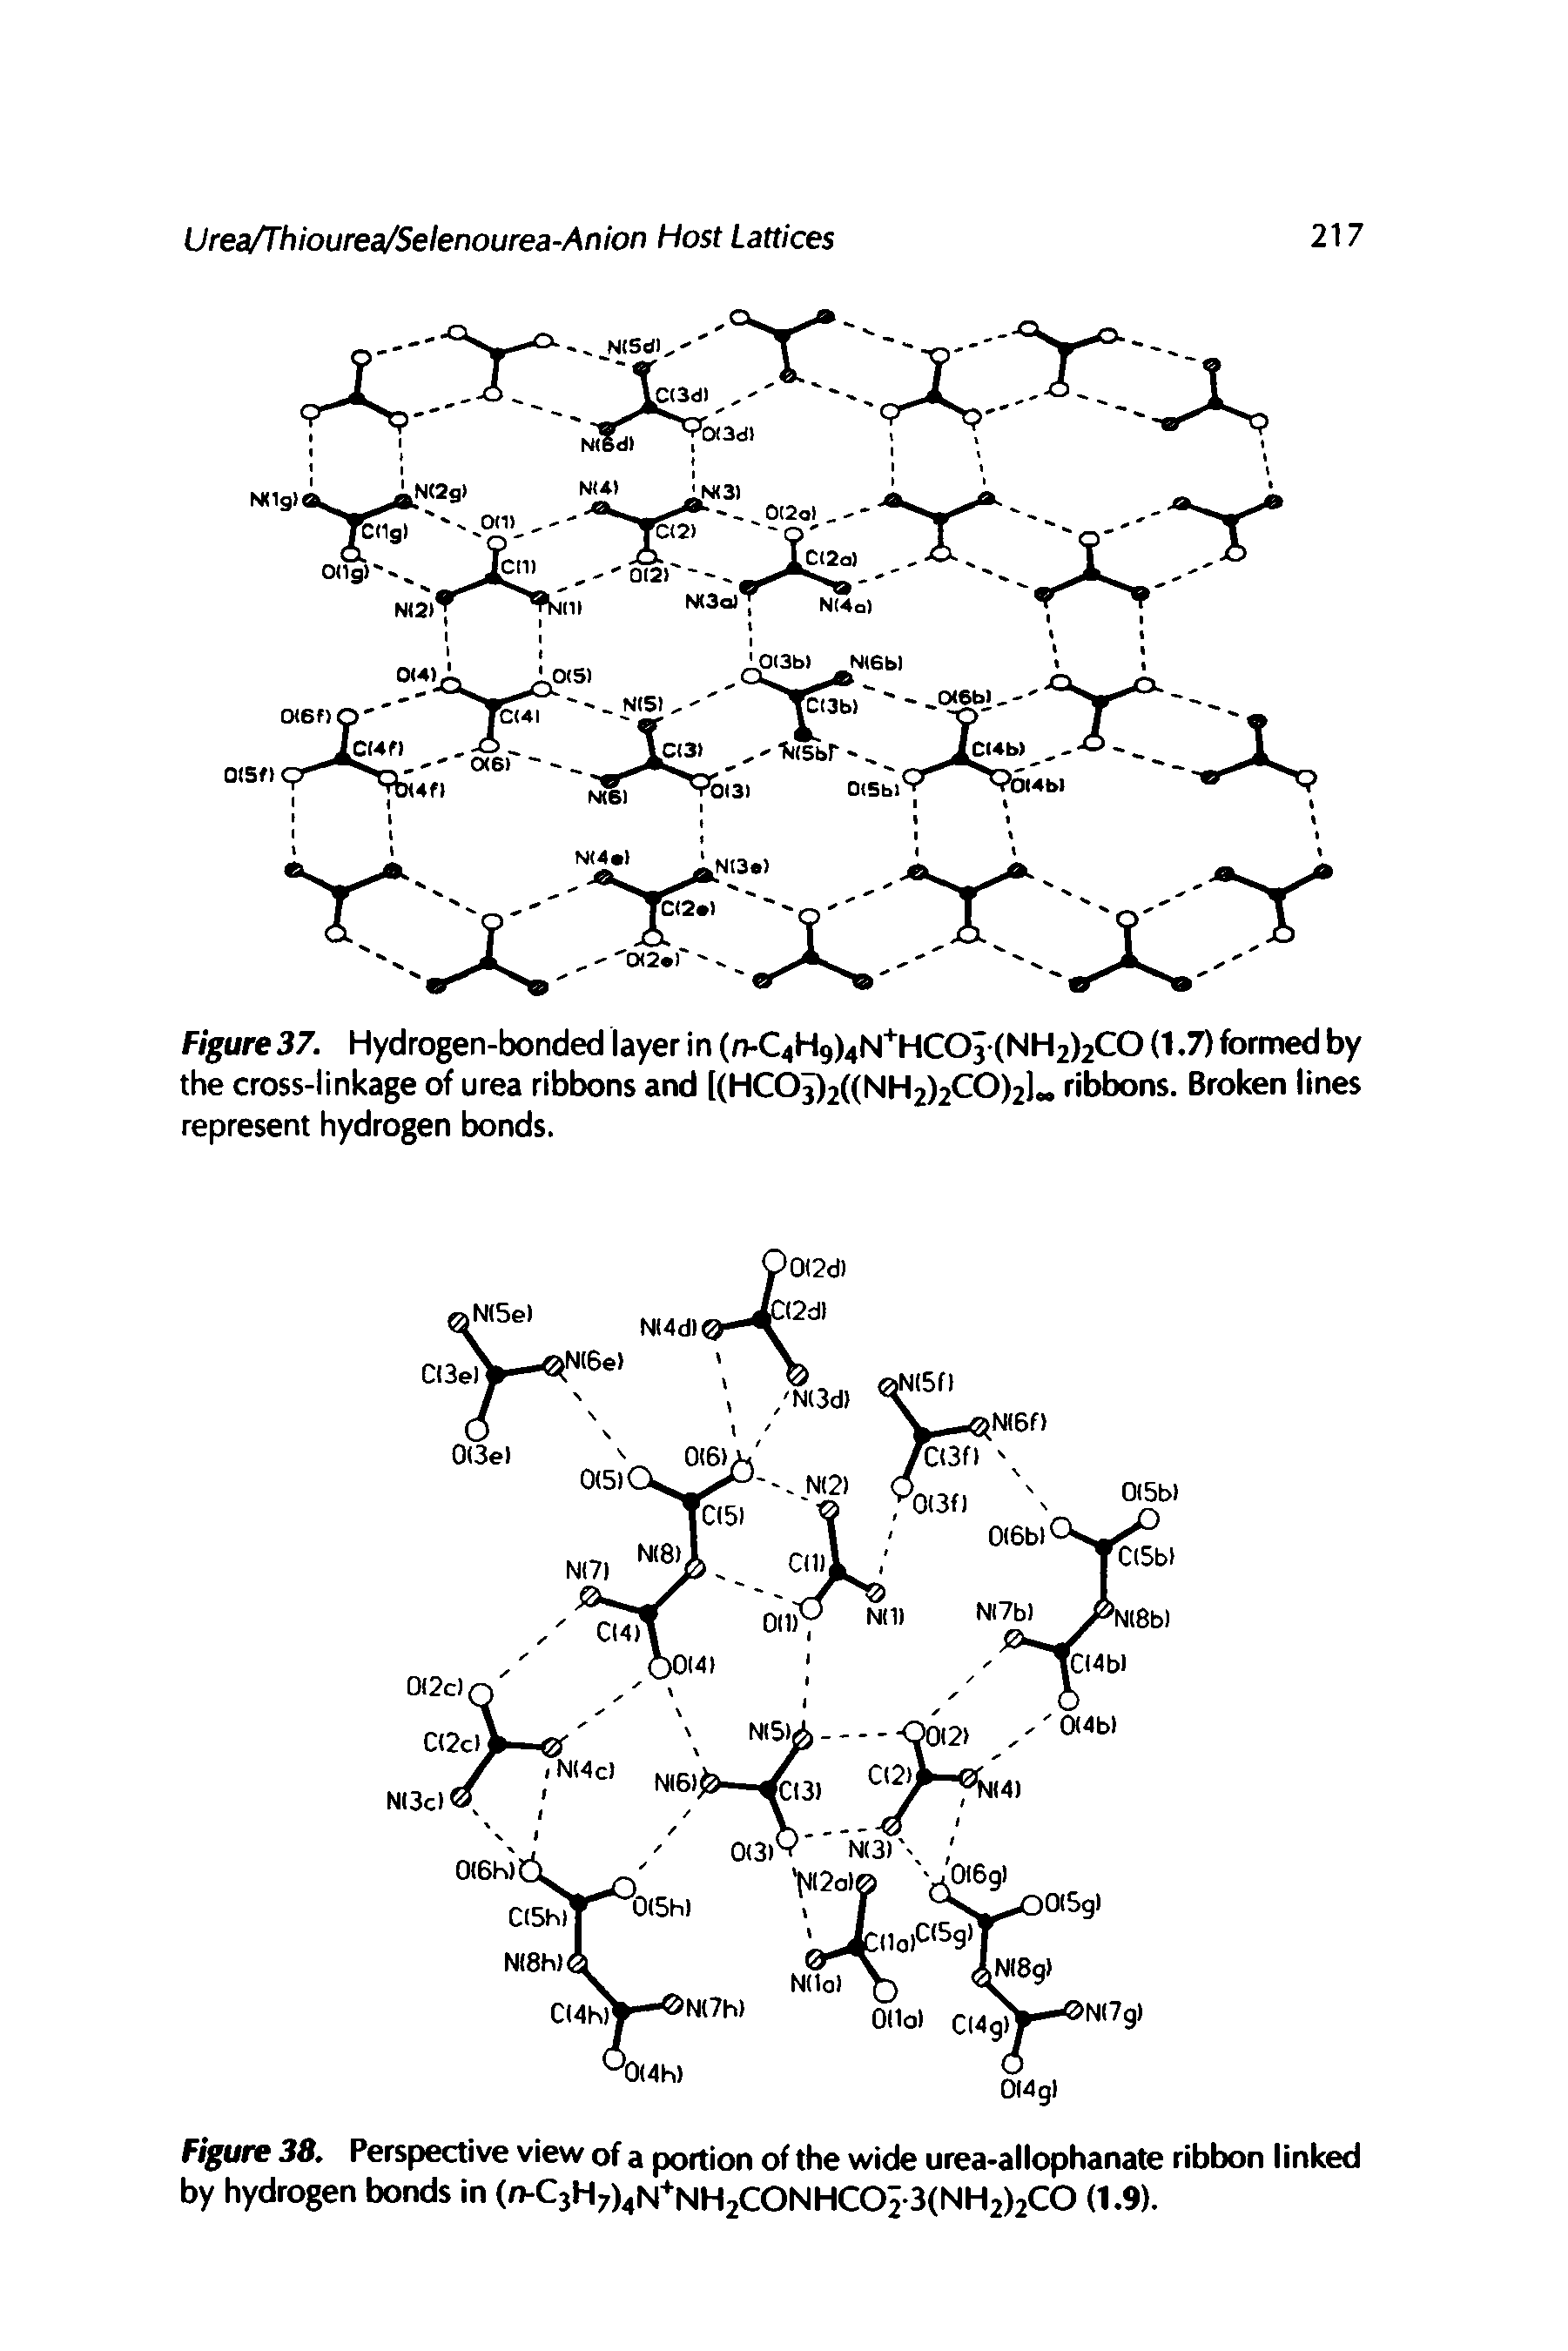 Figure 38. Perspective view of a portion of the wide urea-allophanate ribbon linked by hydrogen bonds in (rvCjH7)4N+NH2CONHCOi-3(NH2)2CO (1.9).